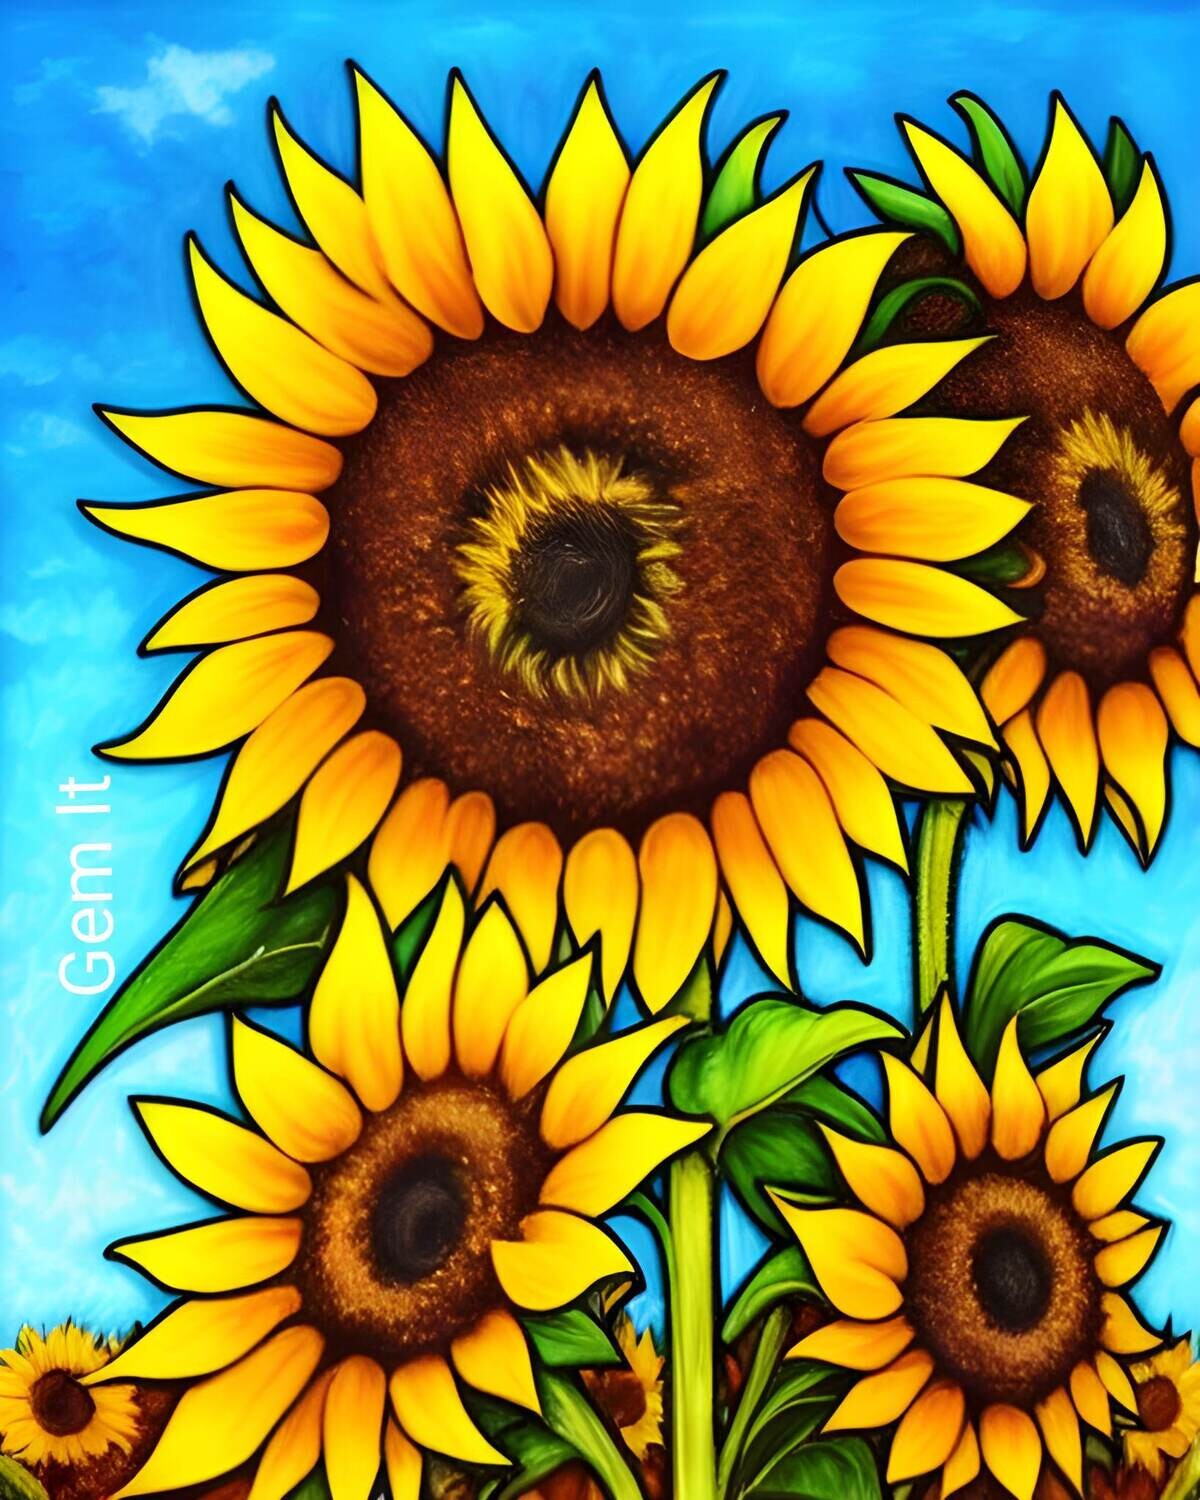 Sunflowers - Specially ordered for you. Delivery is approximately 4 - 6 weeks.